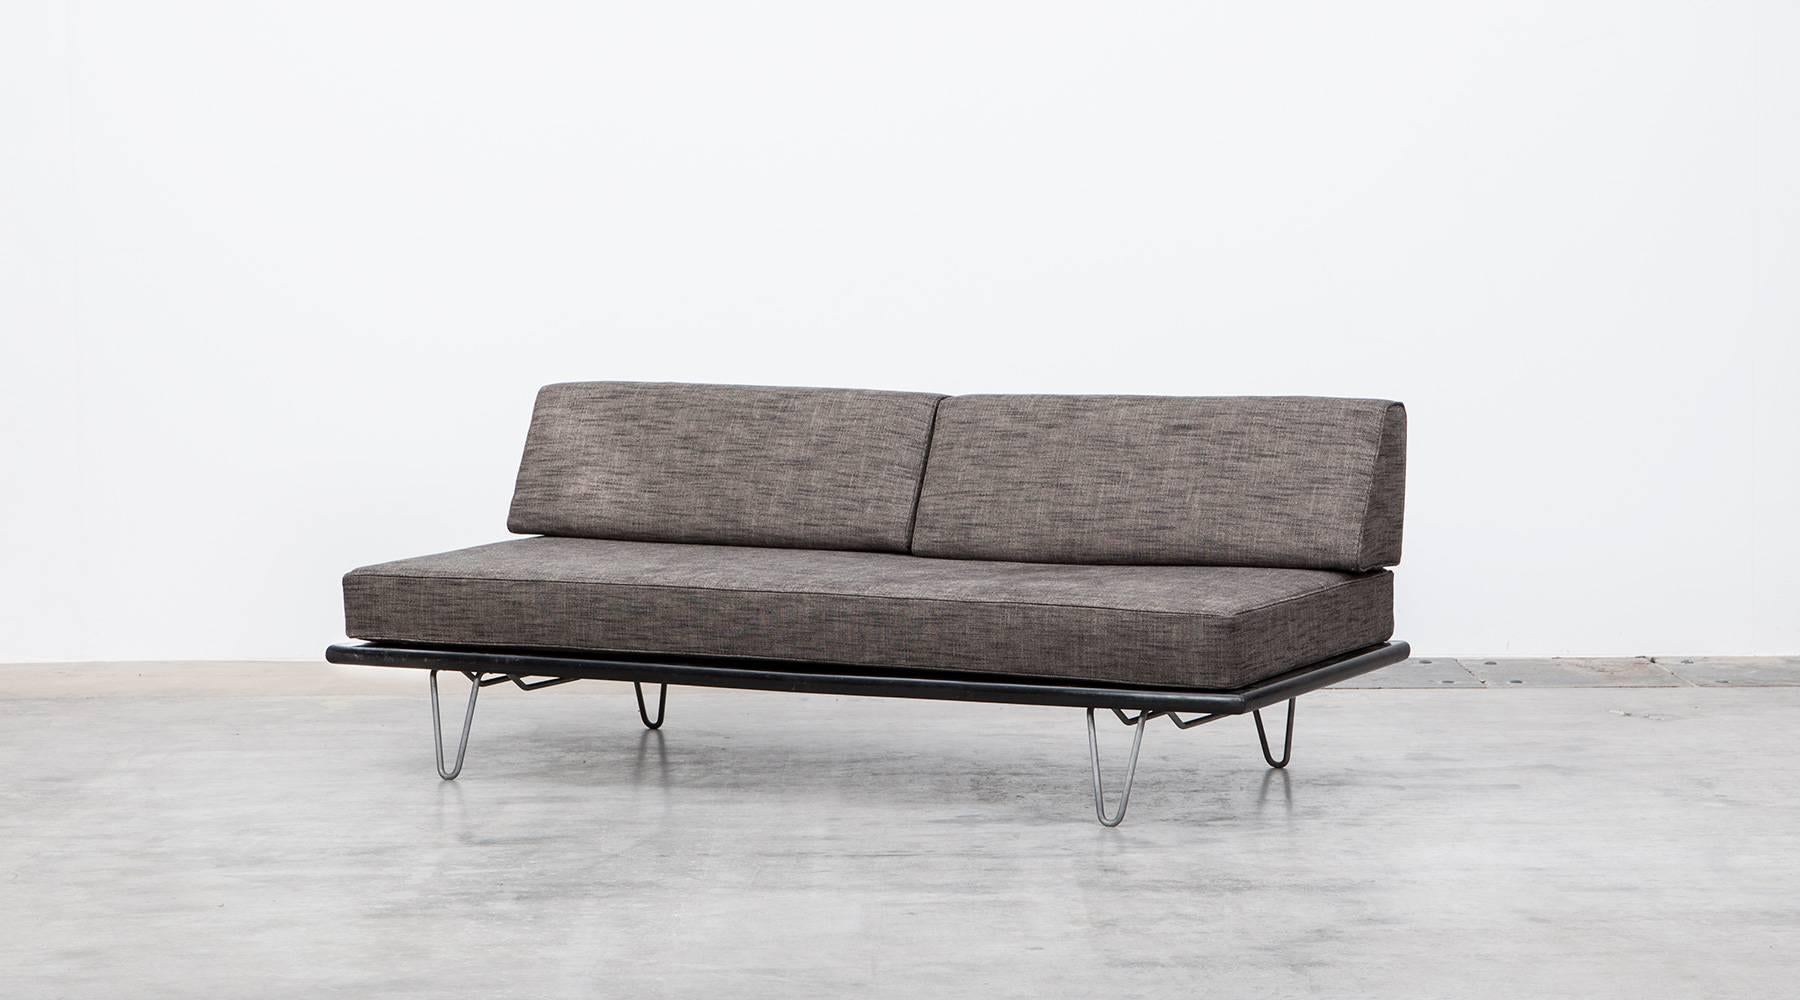 The daybed designed by George Nelson is newly upholstery with high-quality fabric and comes on metal legs holding a wooden frame. The Minimalist design gives each room an elegant atmosphere. Manufactured by Herman Miller.